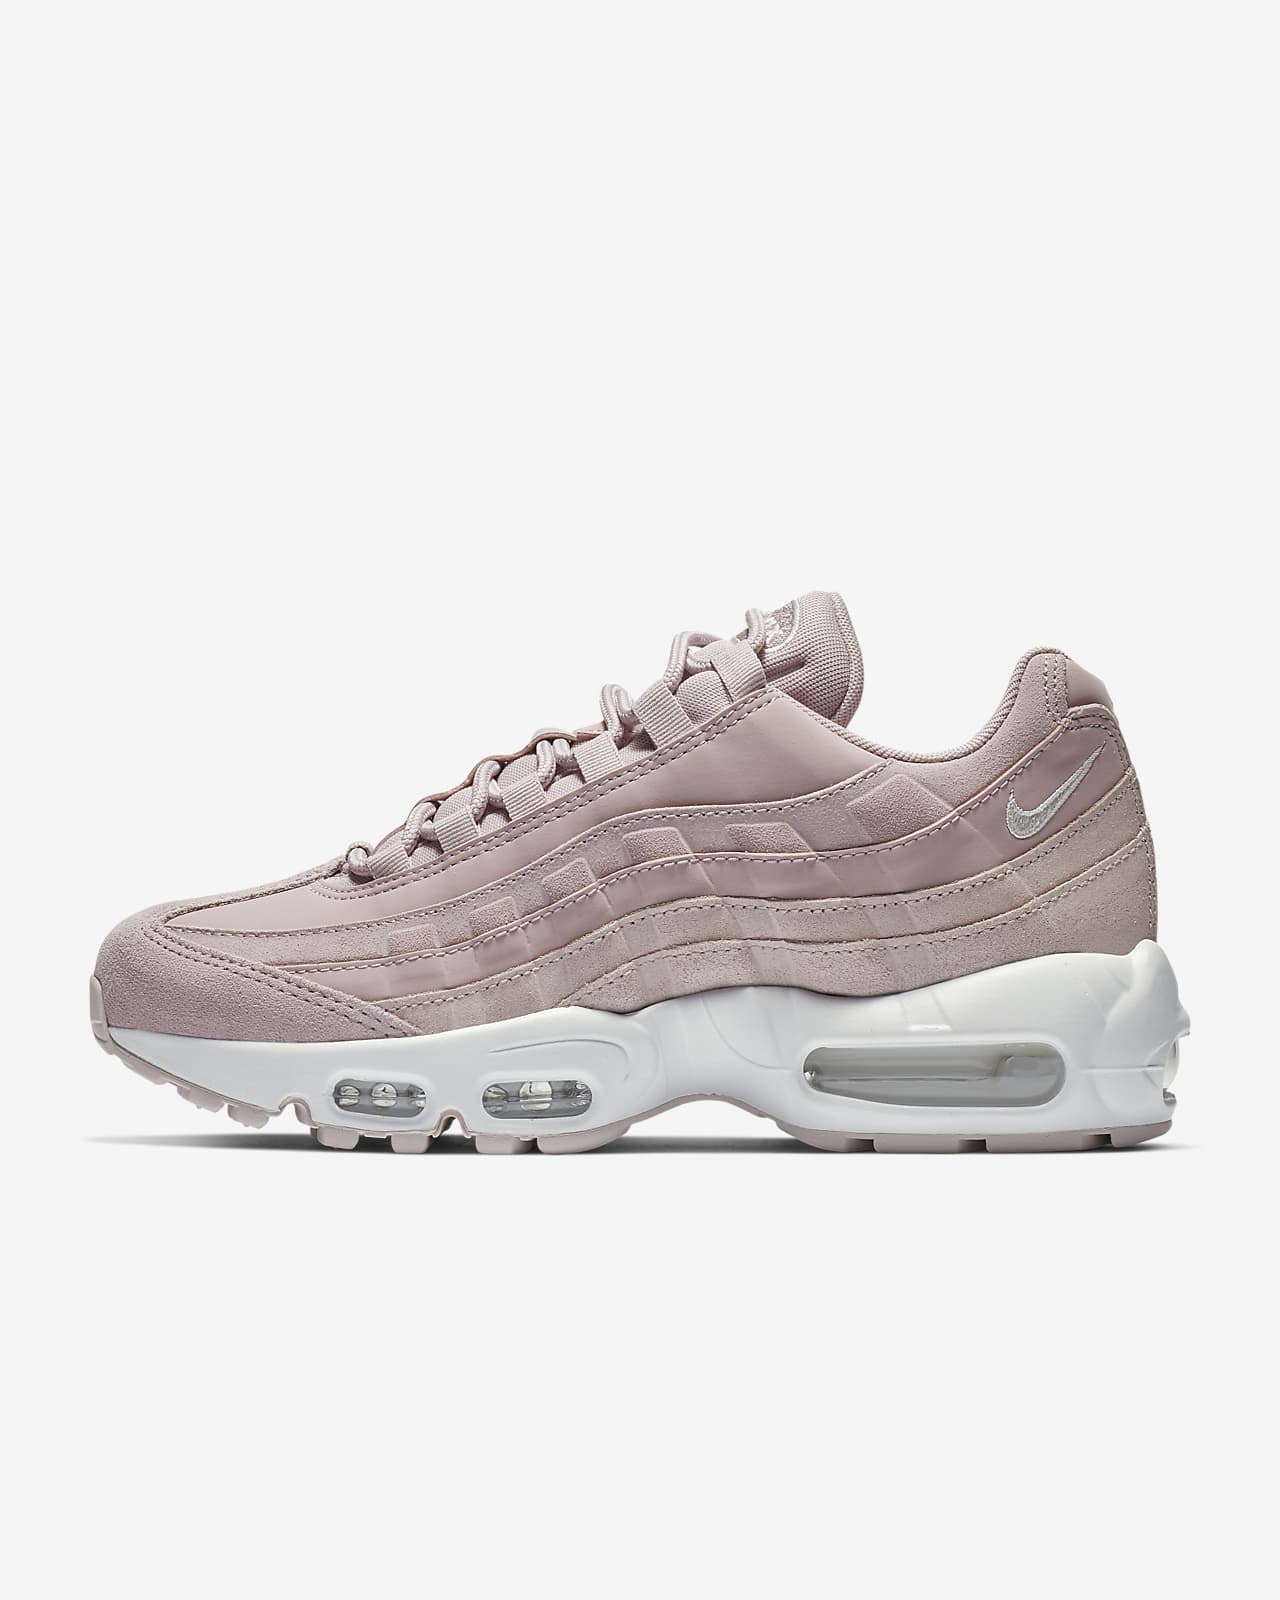 Nike Air Max 95 Light Cream Online Shop, UP TO 56% OFF